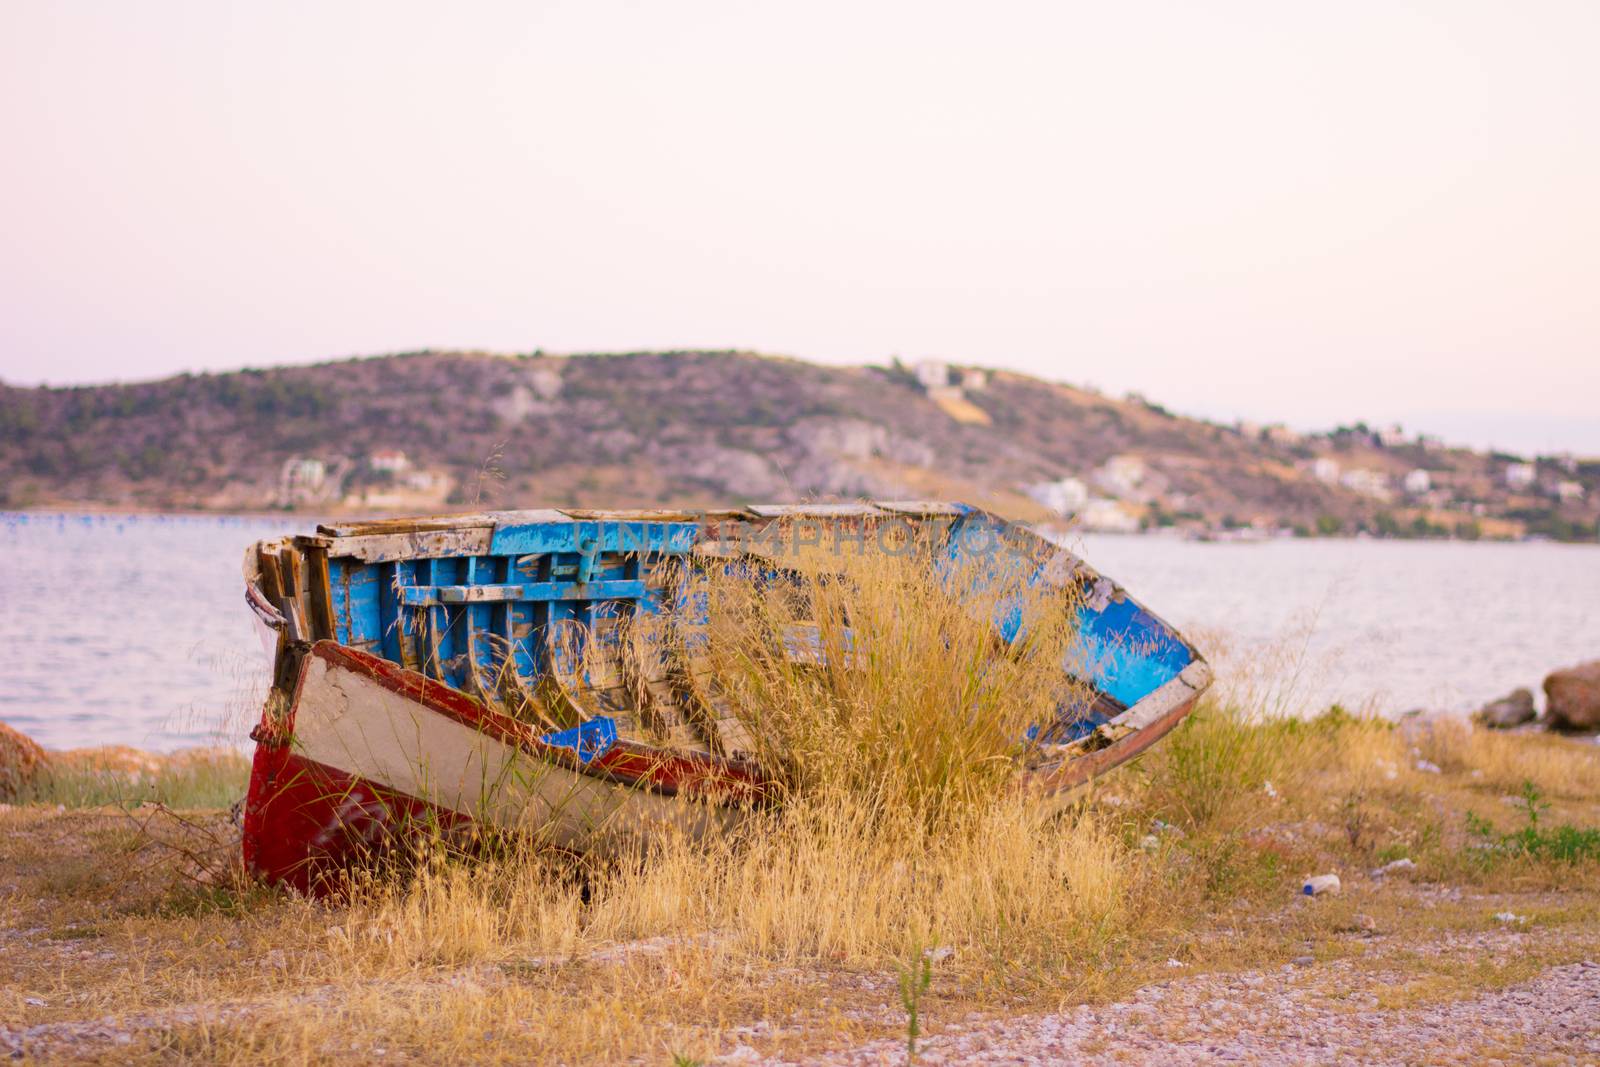 View of an old rusty boat out of the water.